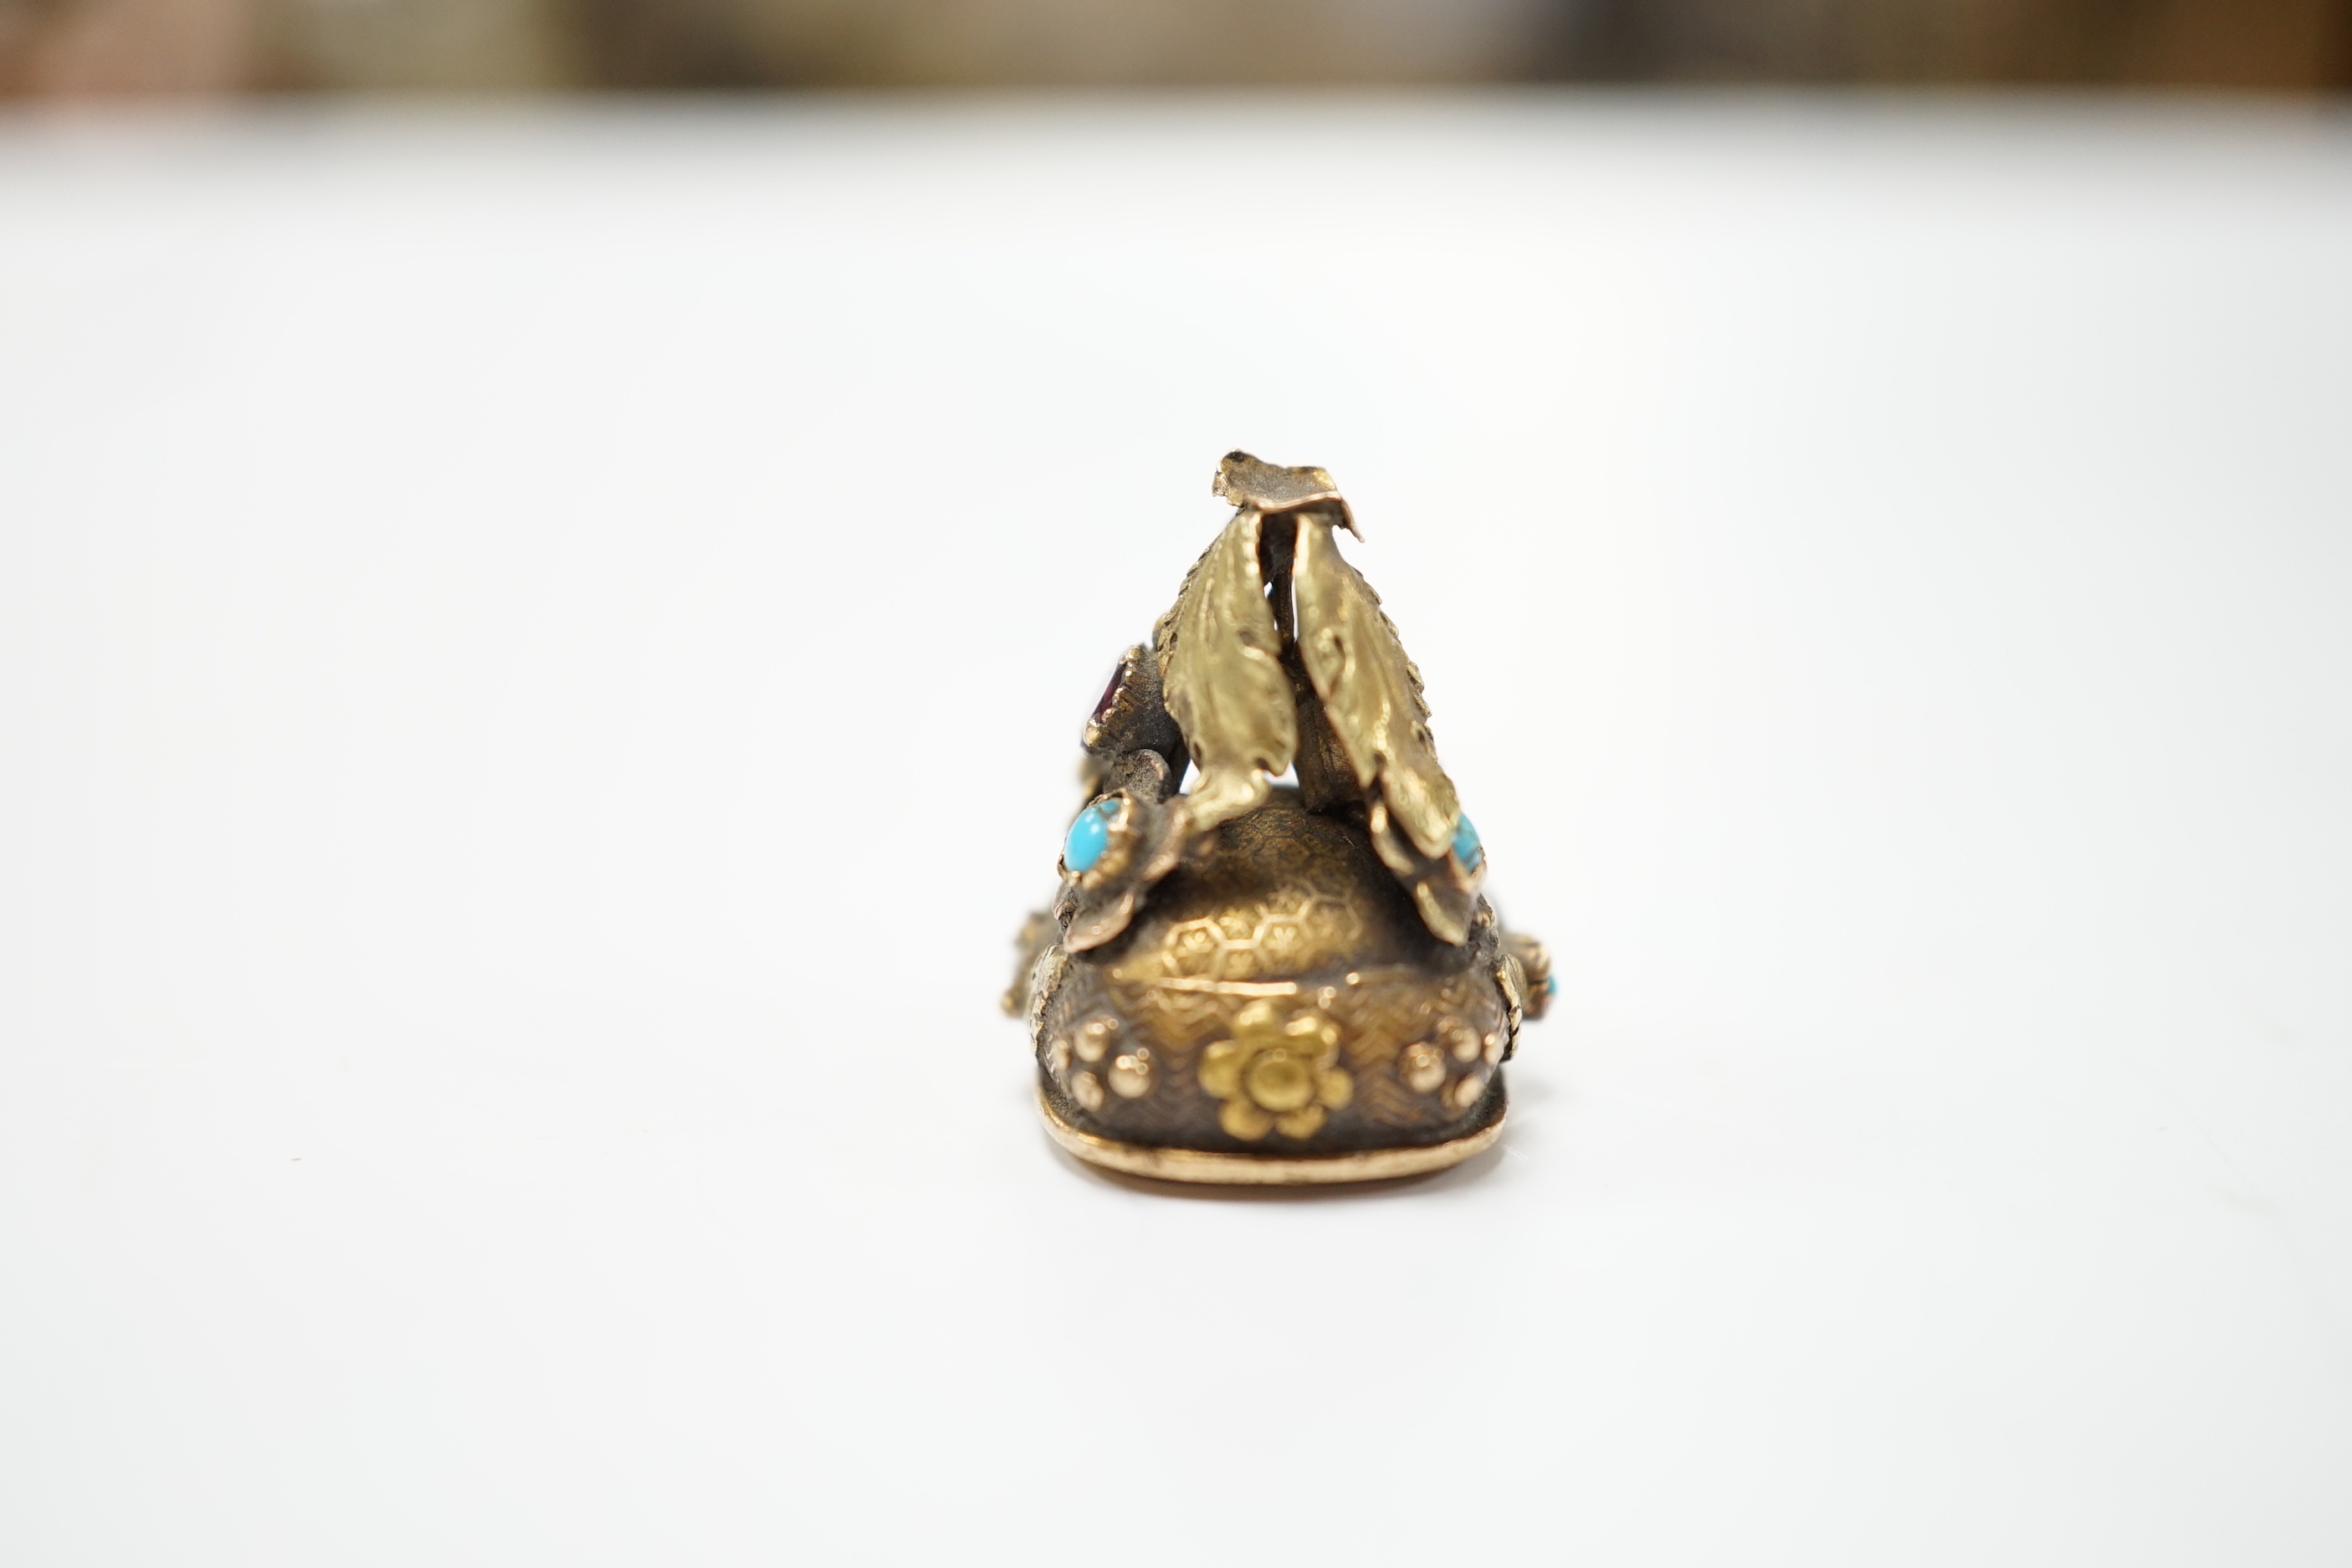 A 19th century yellow metal, garnet and turquoise mounted foil backed amethyst fob seal, the matrix inscribed Lamitie?, 17mm (a.f.).